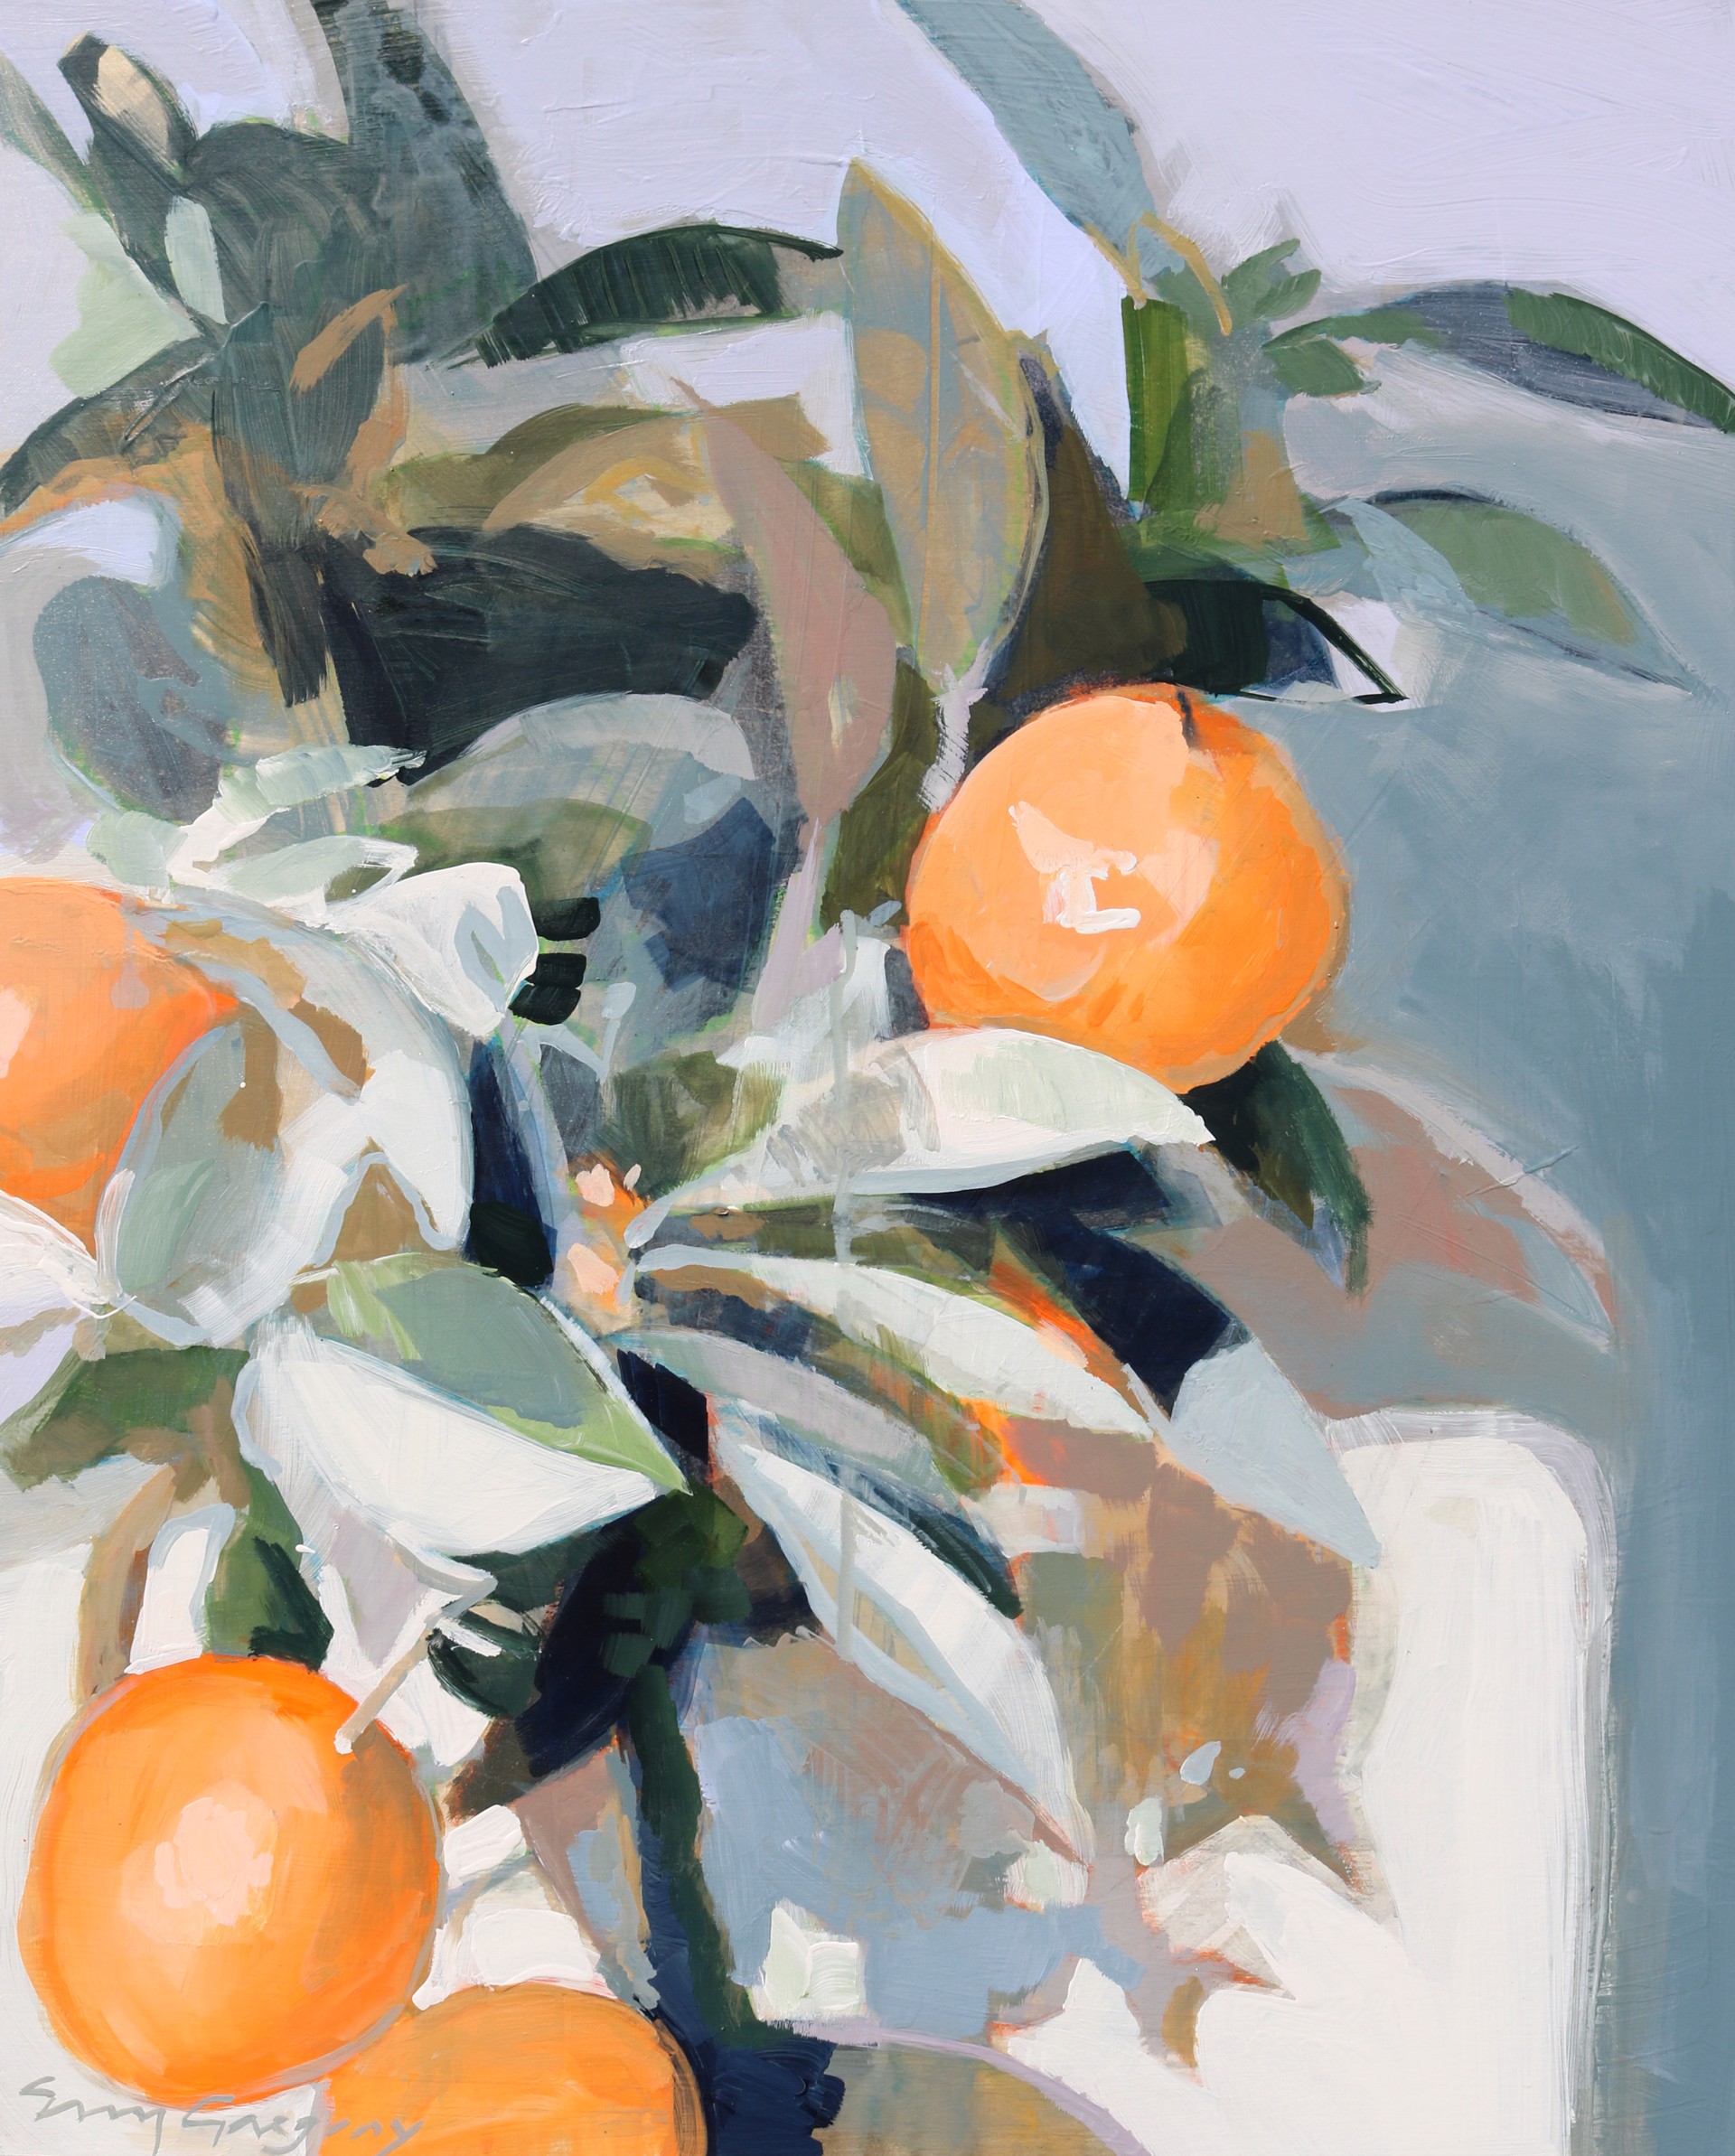 Citrus 1 by Erin Gregory